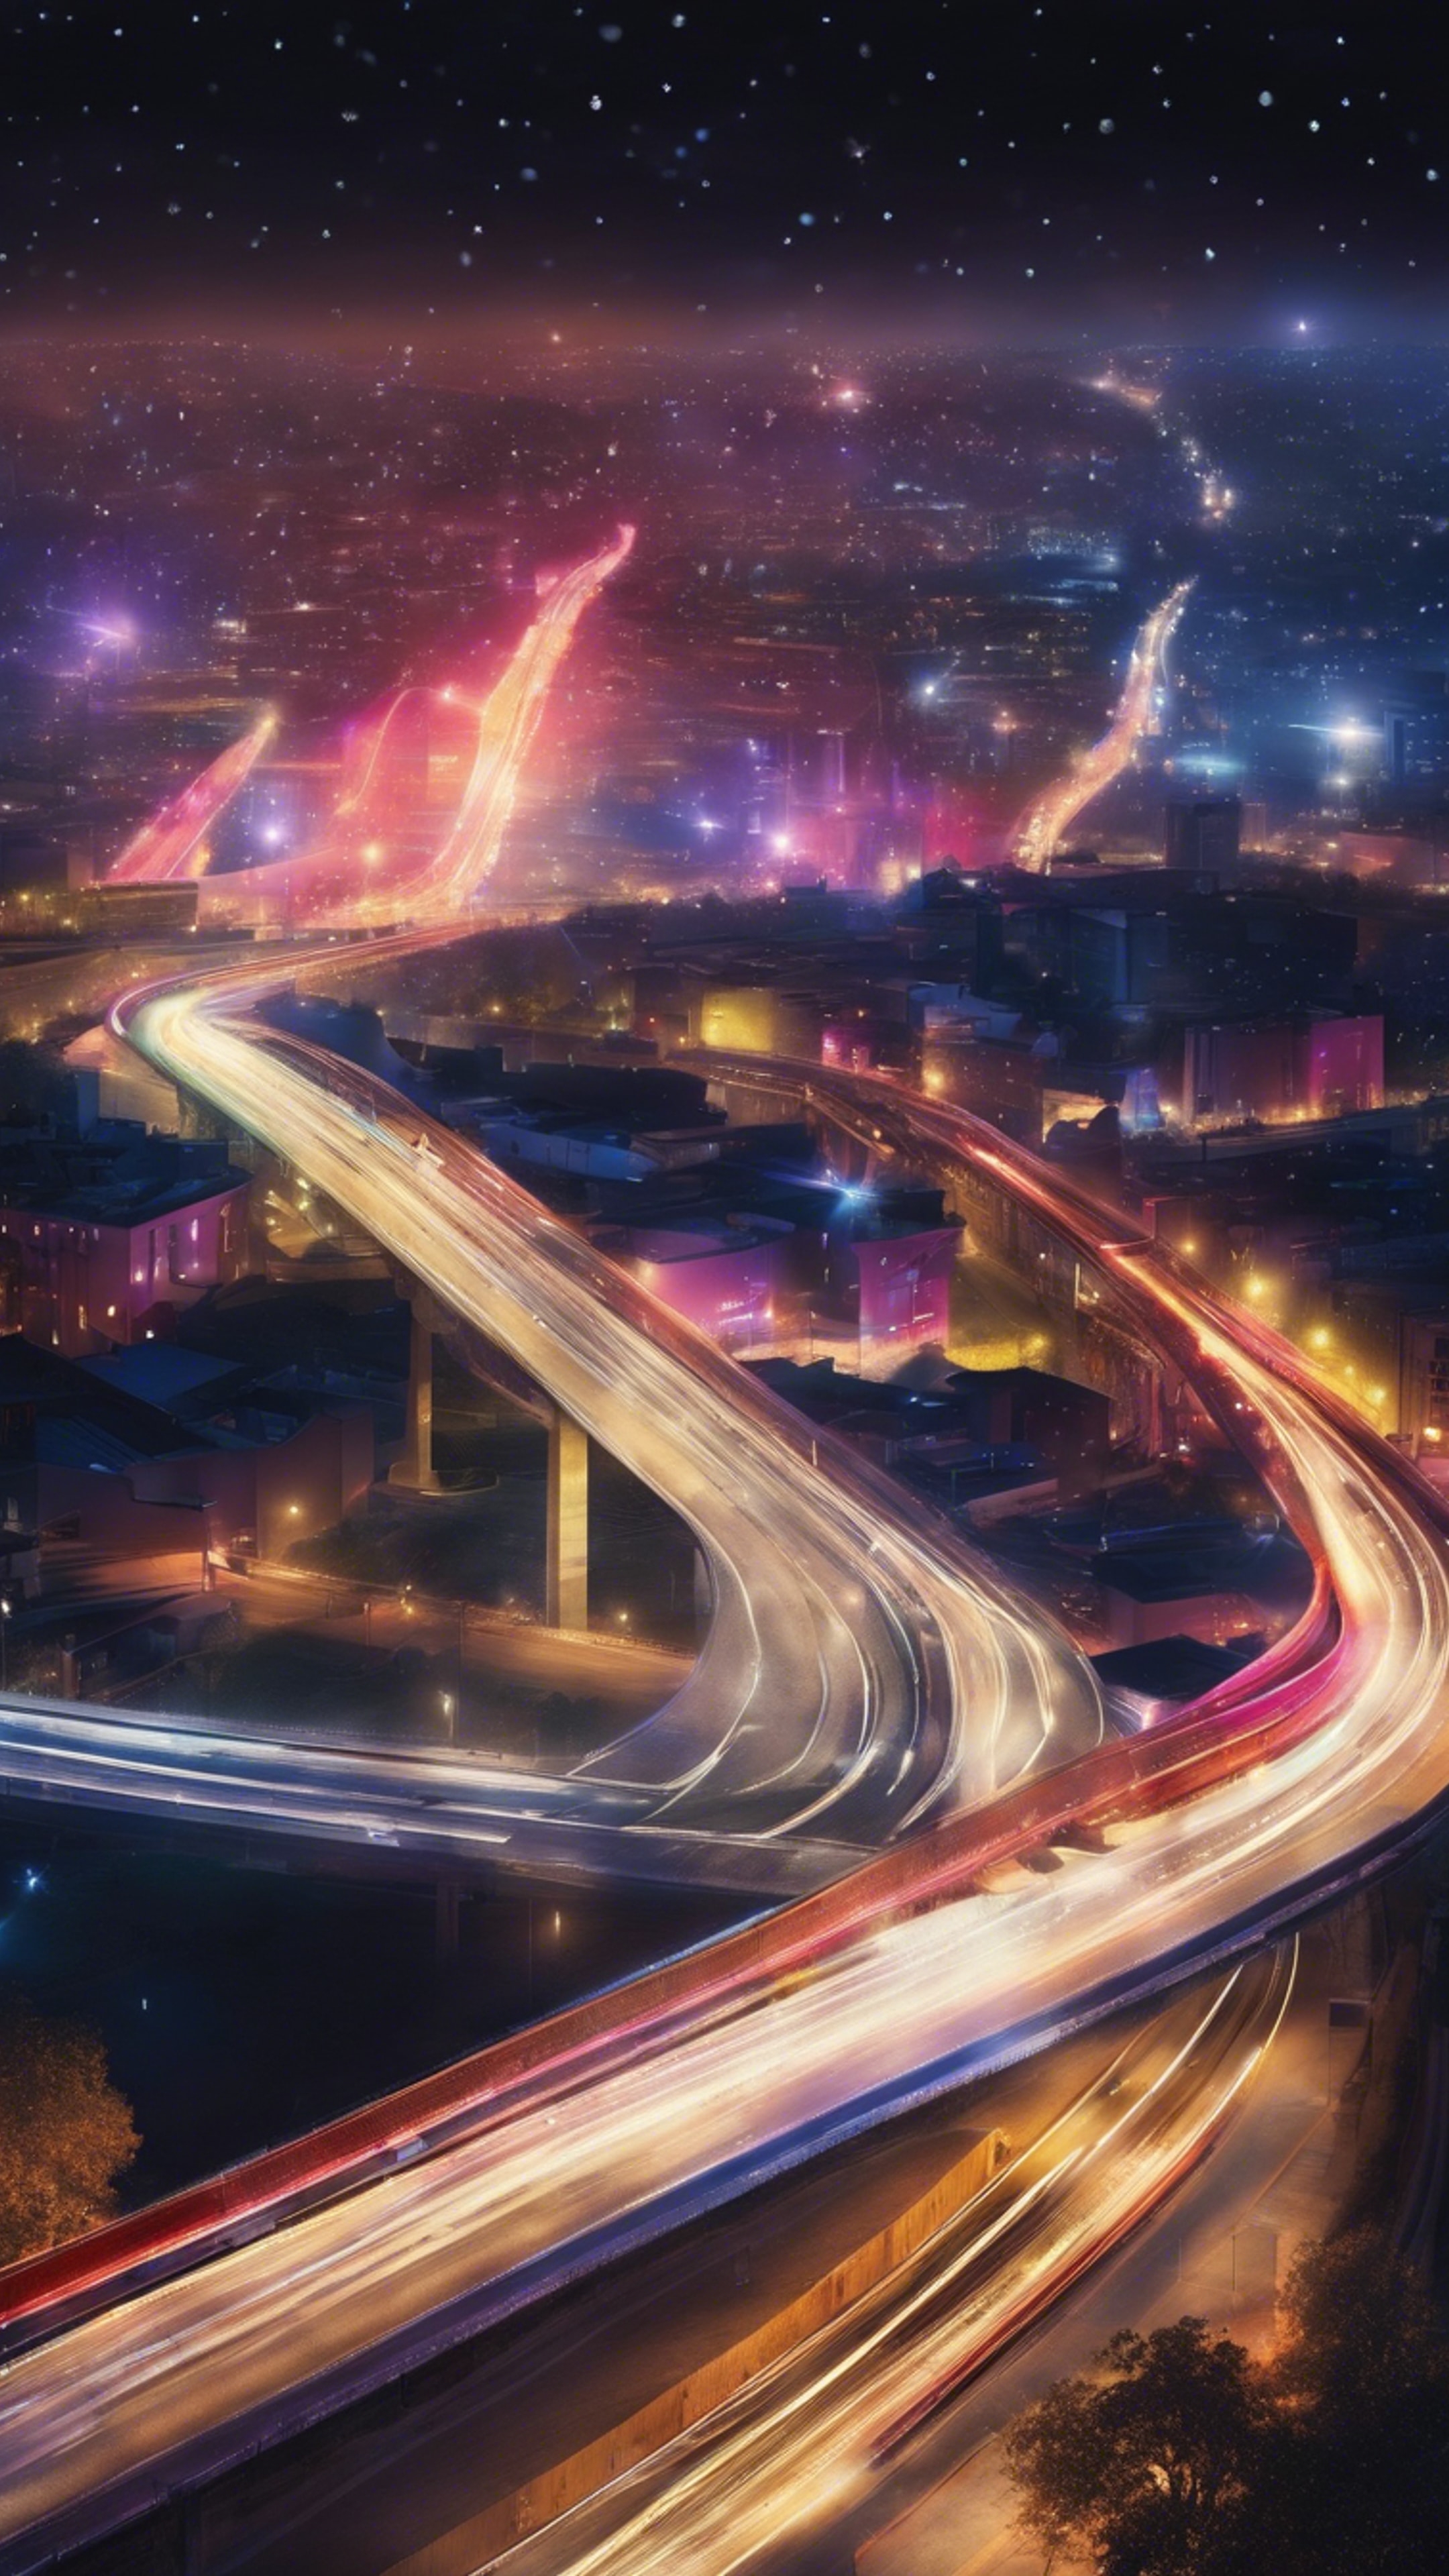 A lustrous highway painting a ribbon of light through the city under the vivid colors of a nocturnal sky. Tapeta[7f6125f7f59b411d957d]